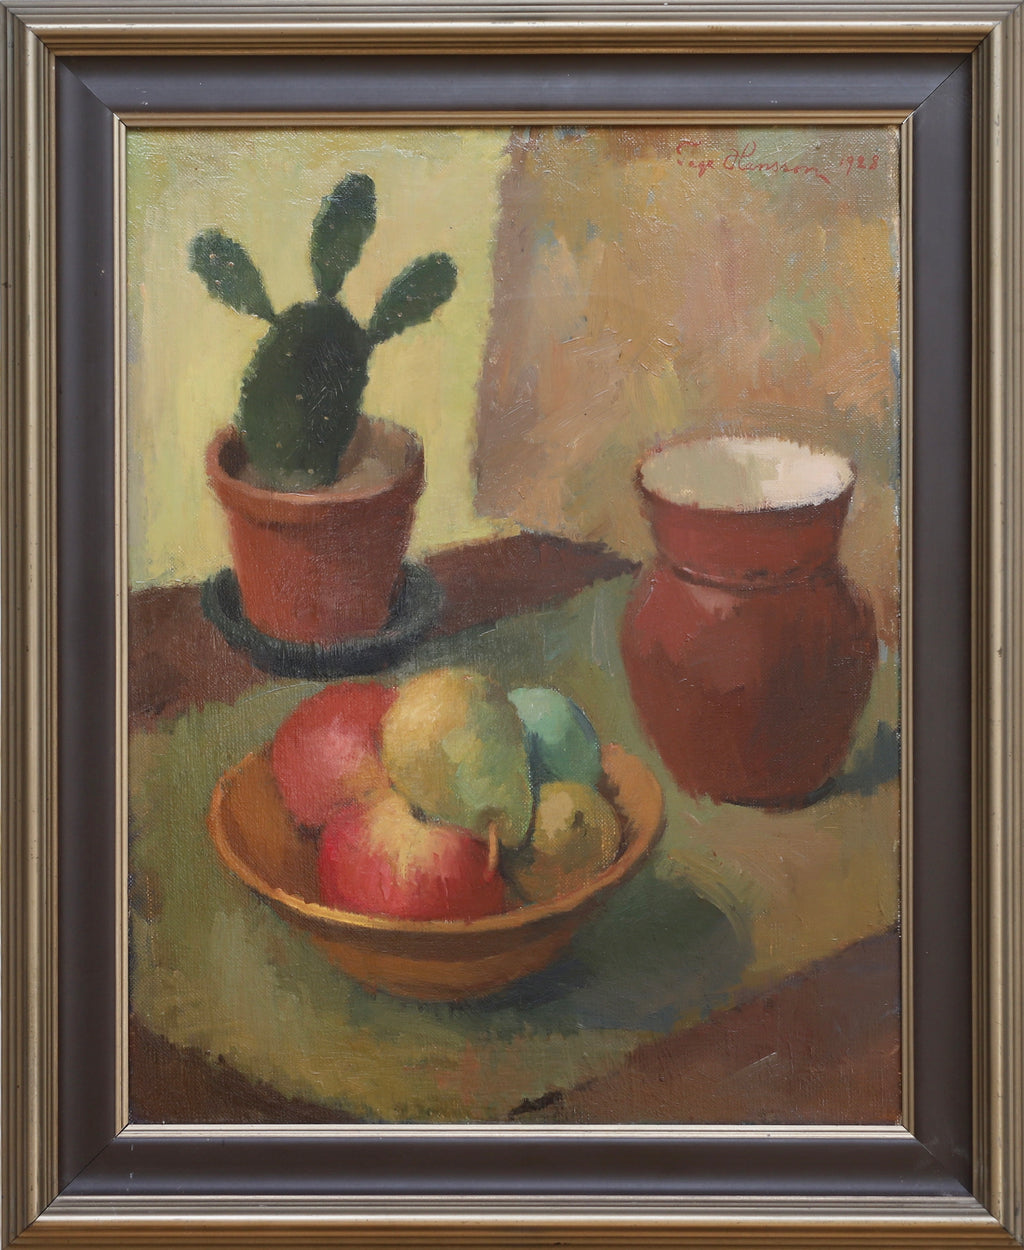 Antique Still Life Oil Painting From Sweden